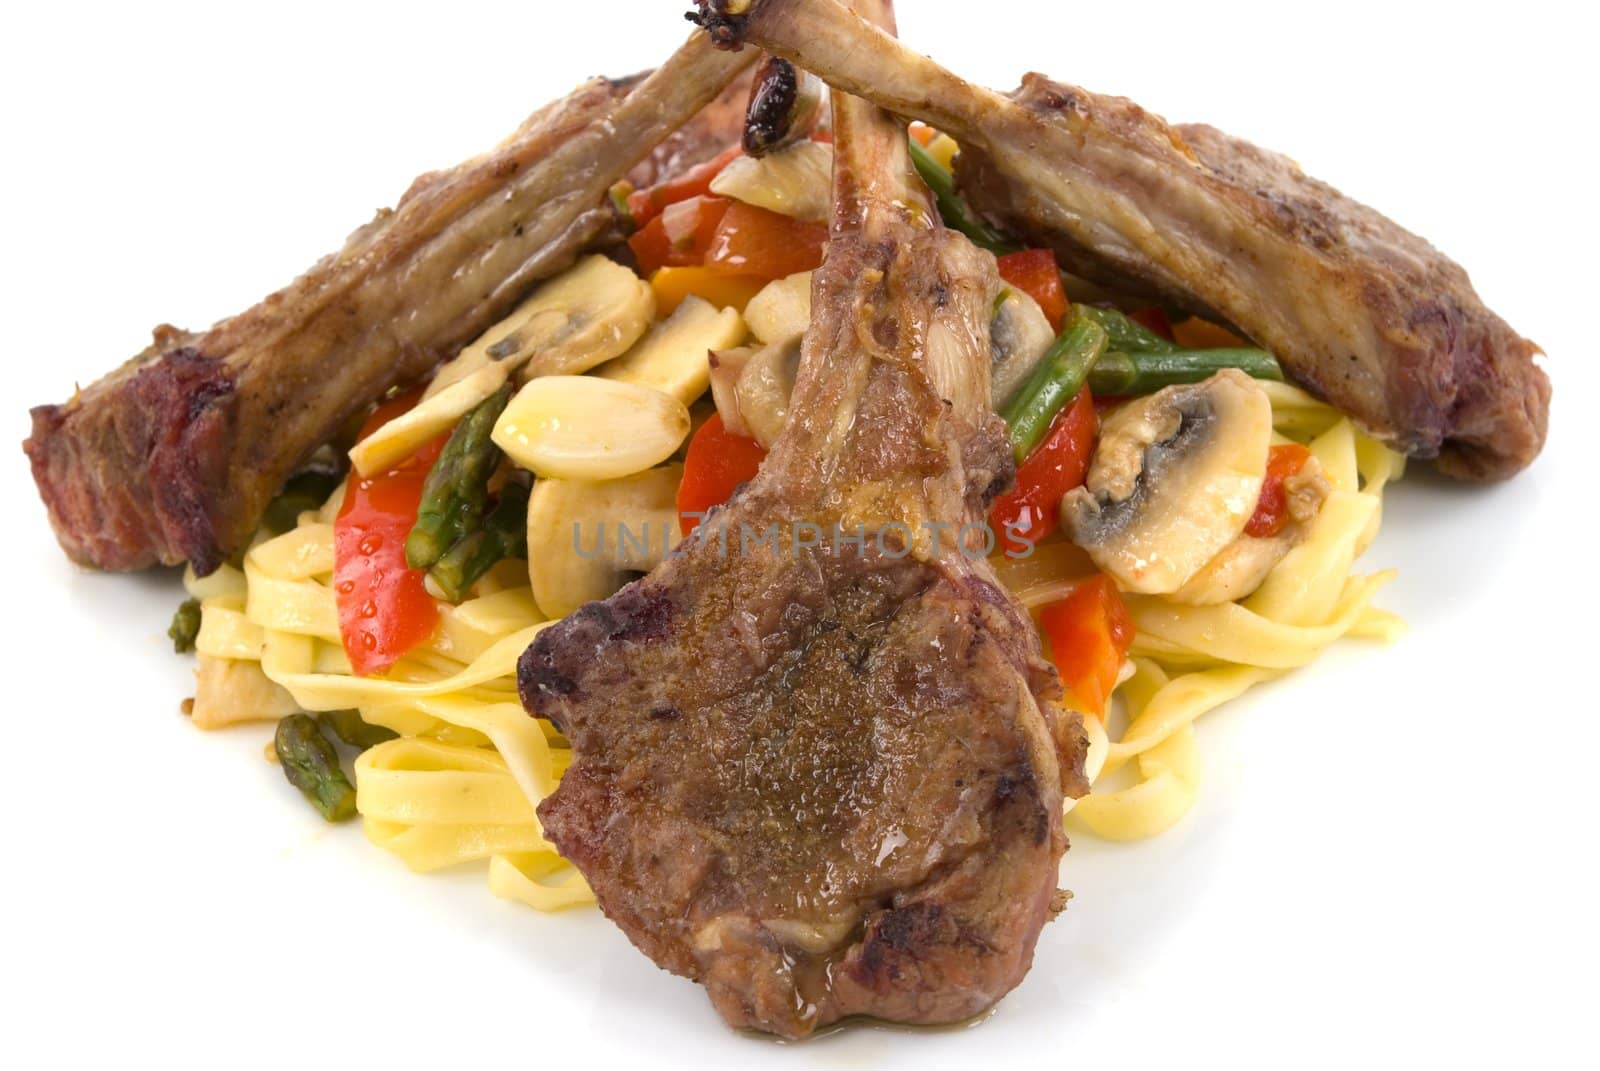 Lamb chops, homemade pasta with tomatoes, asparagus, red and orange bell peppers, mushroom, shallots, and garlic